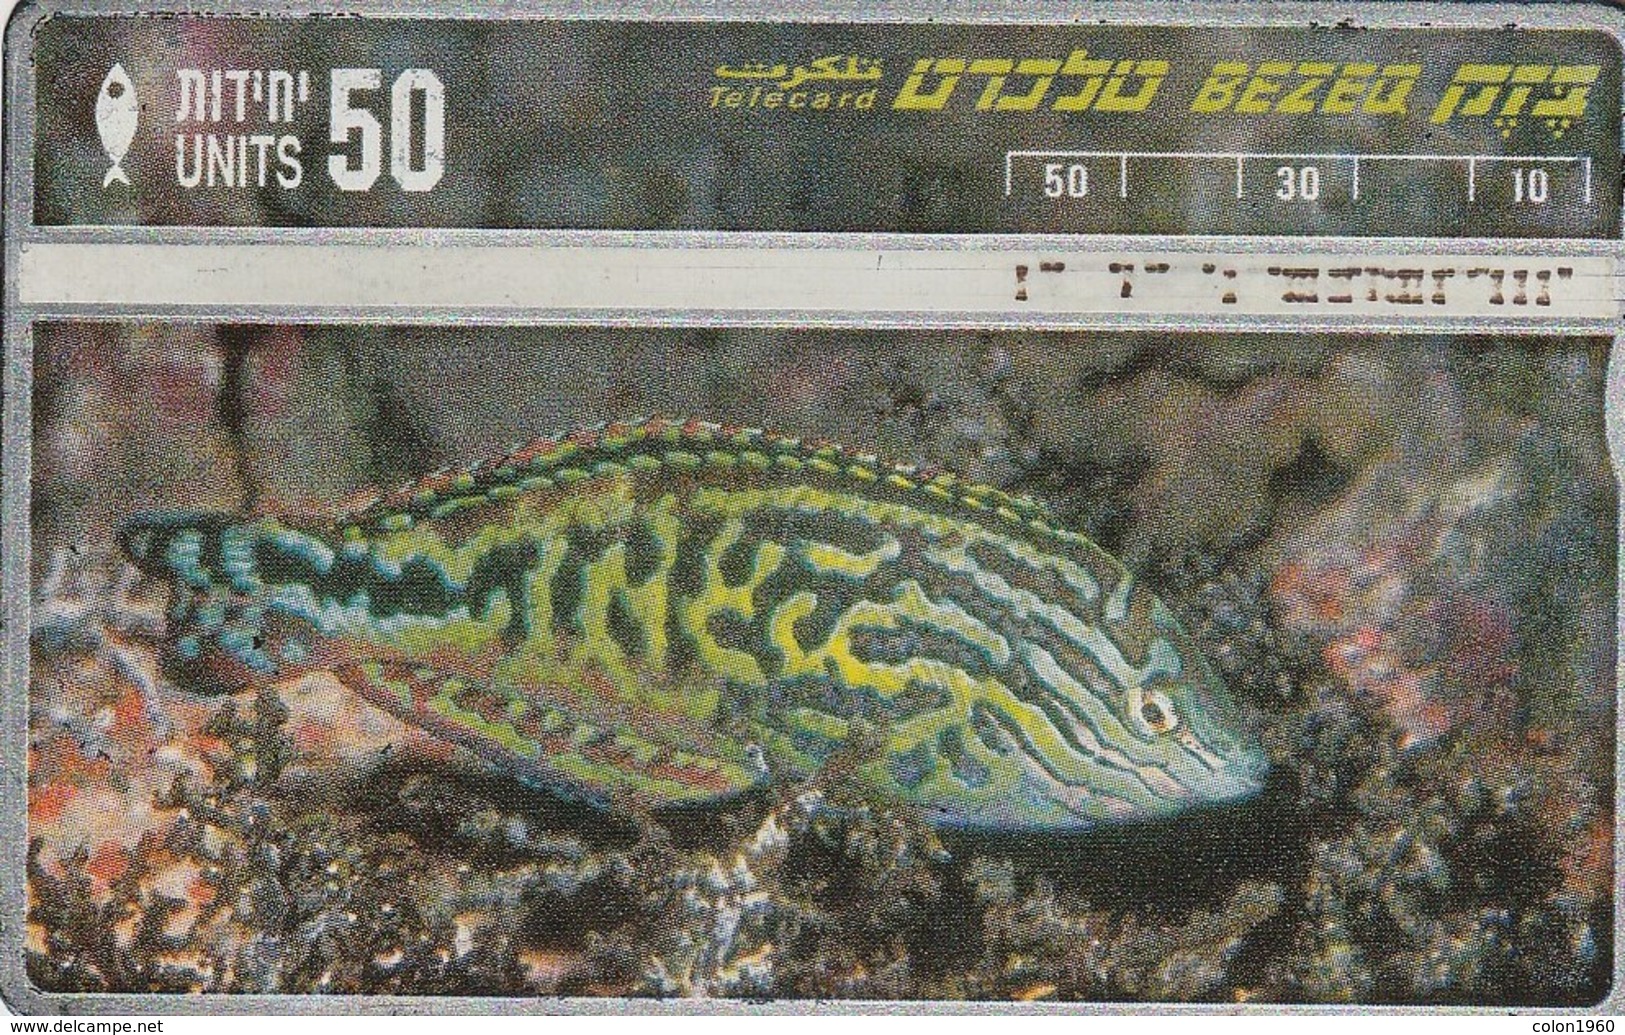 ISRAEL. Fish Of The Red Sea, Noniv Of Lines. BZ-154 (159) - Peces